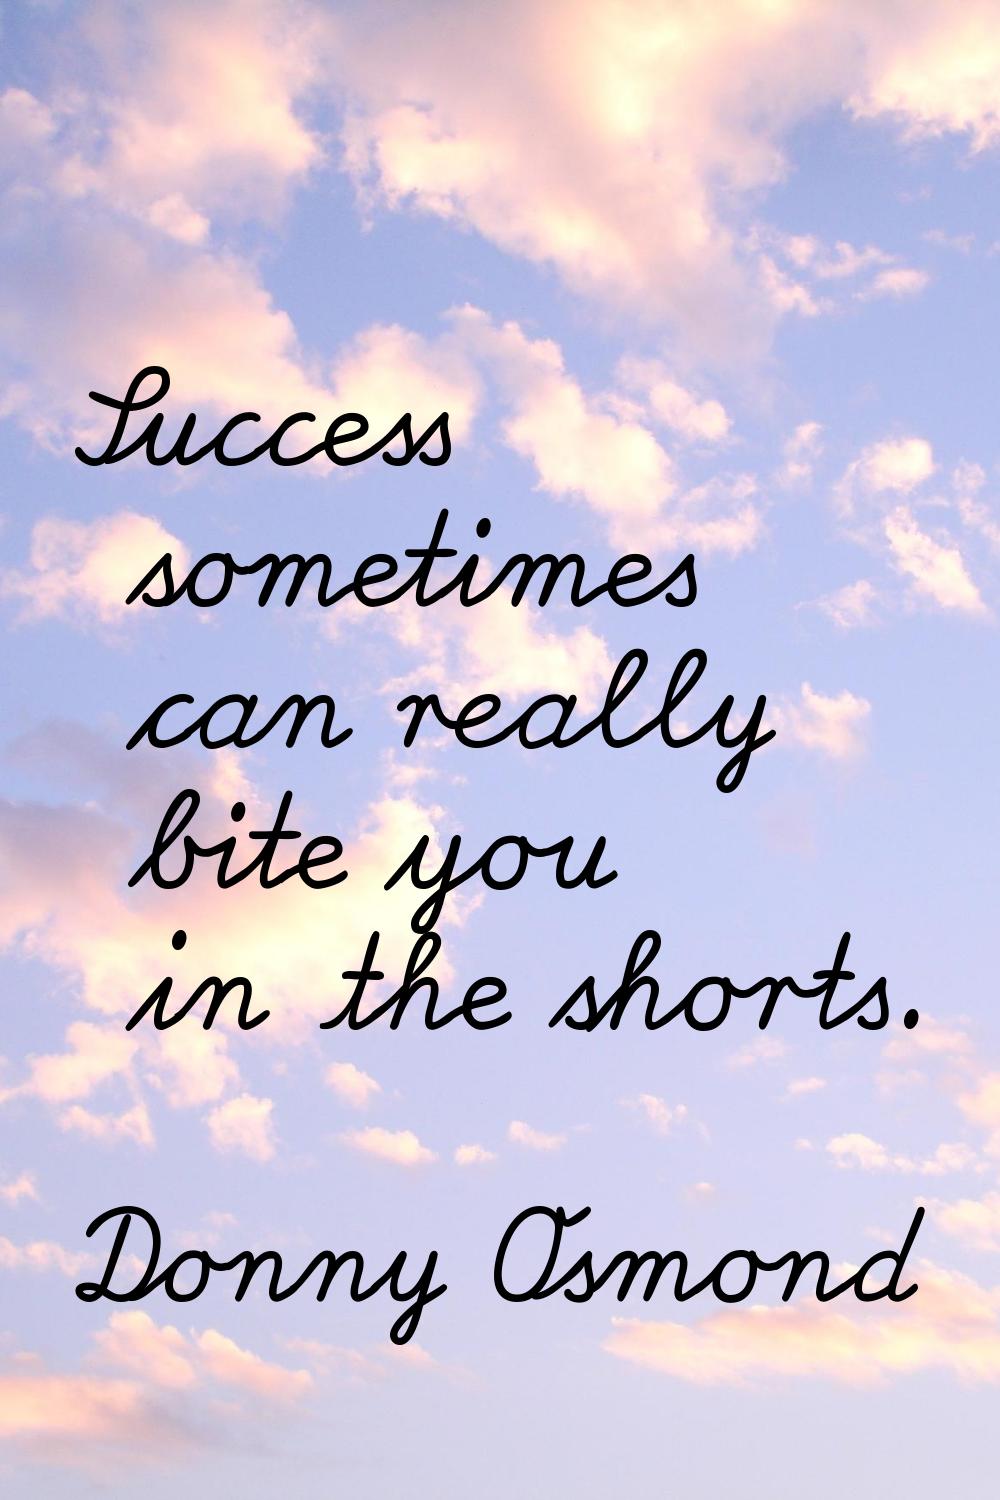 Success sometimes can really bite you in the shorts.